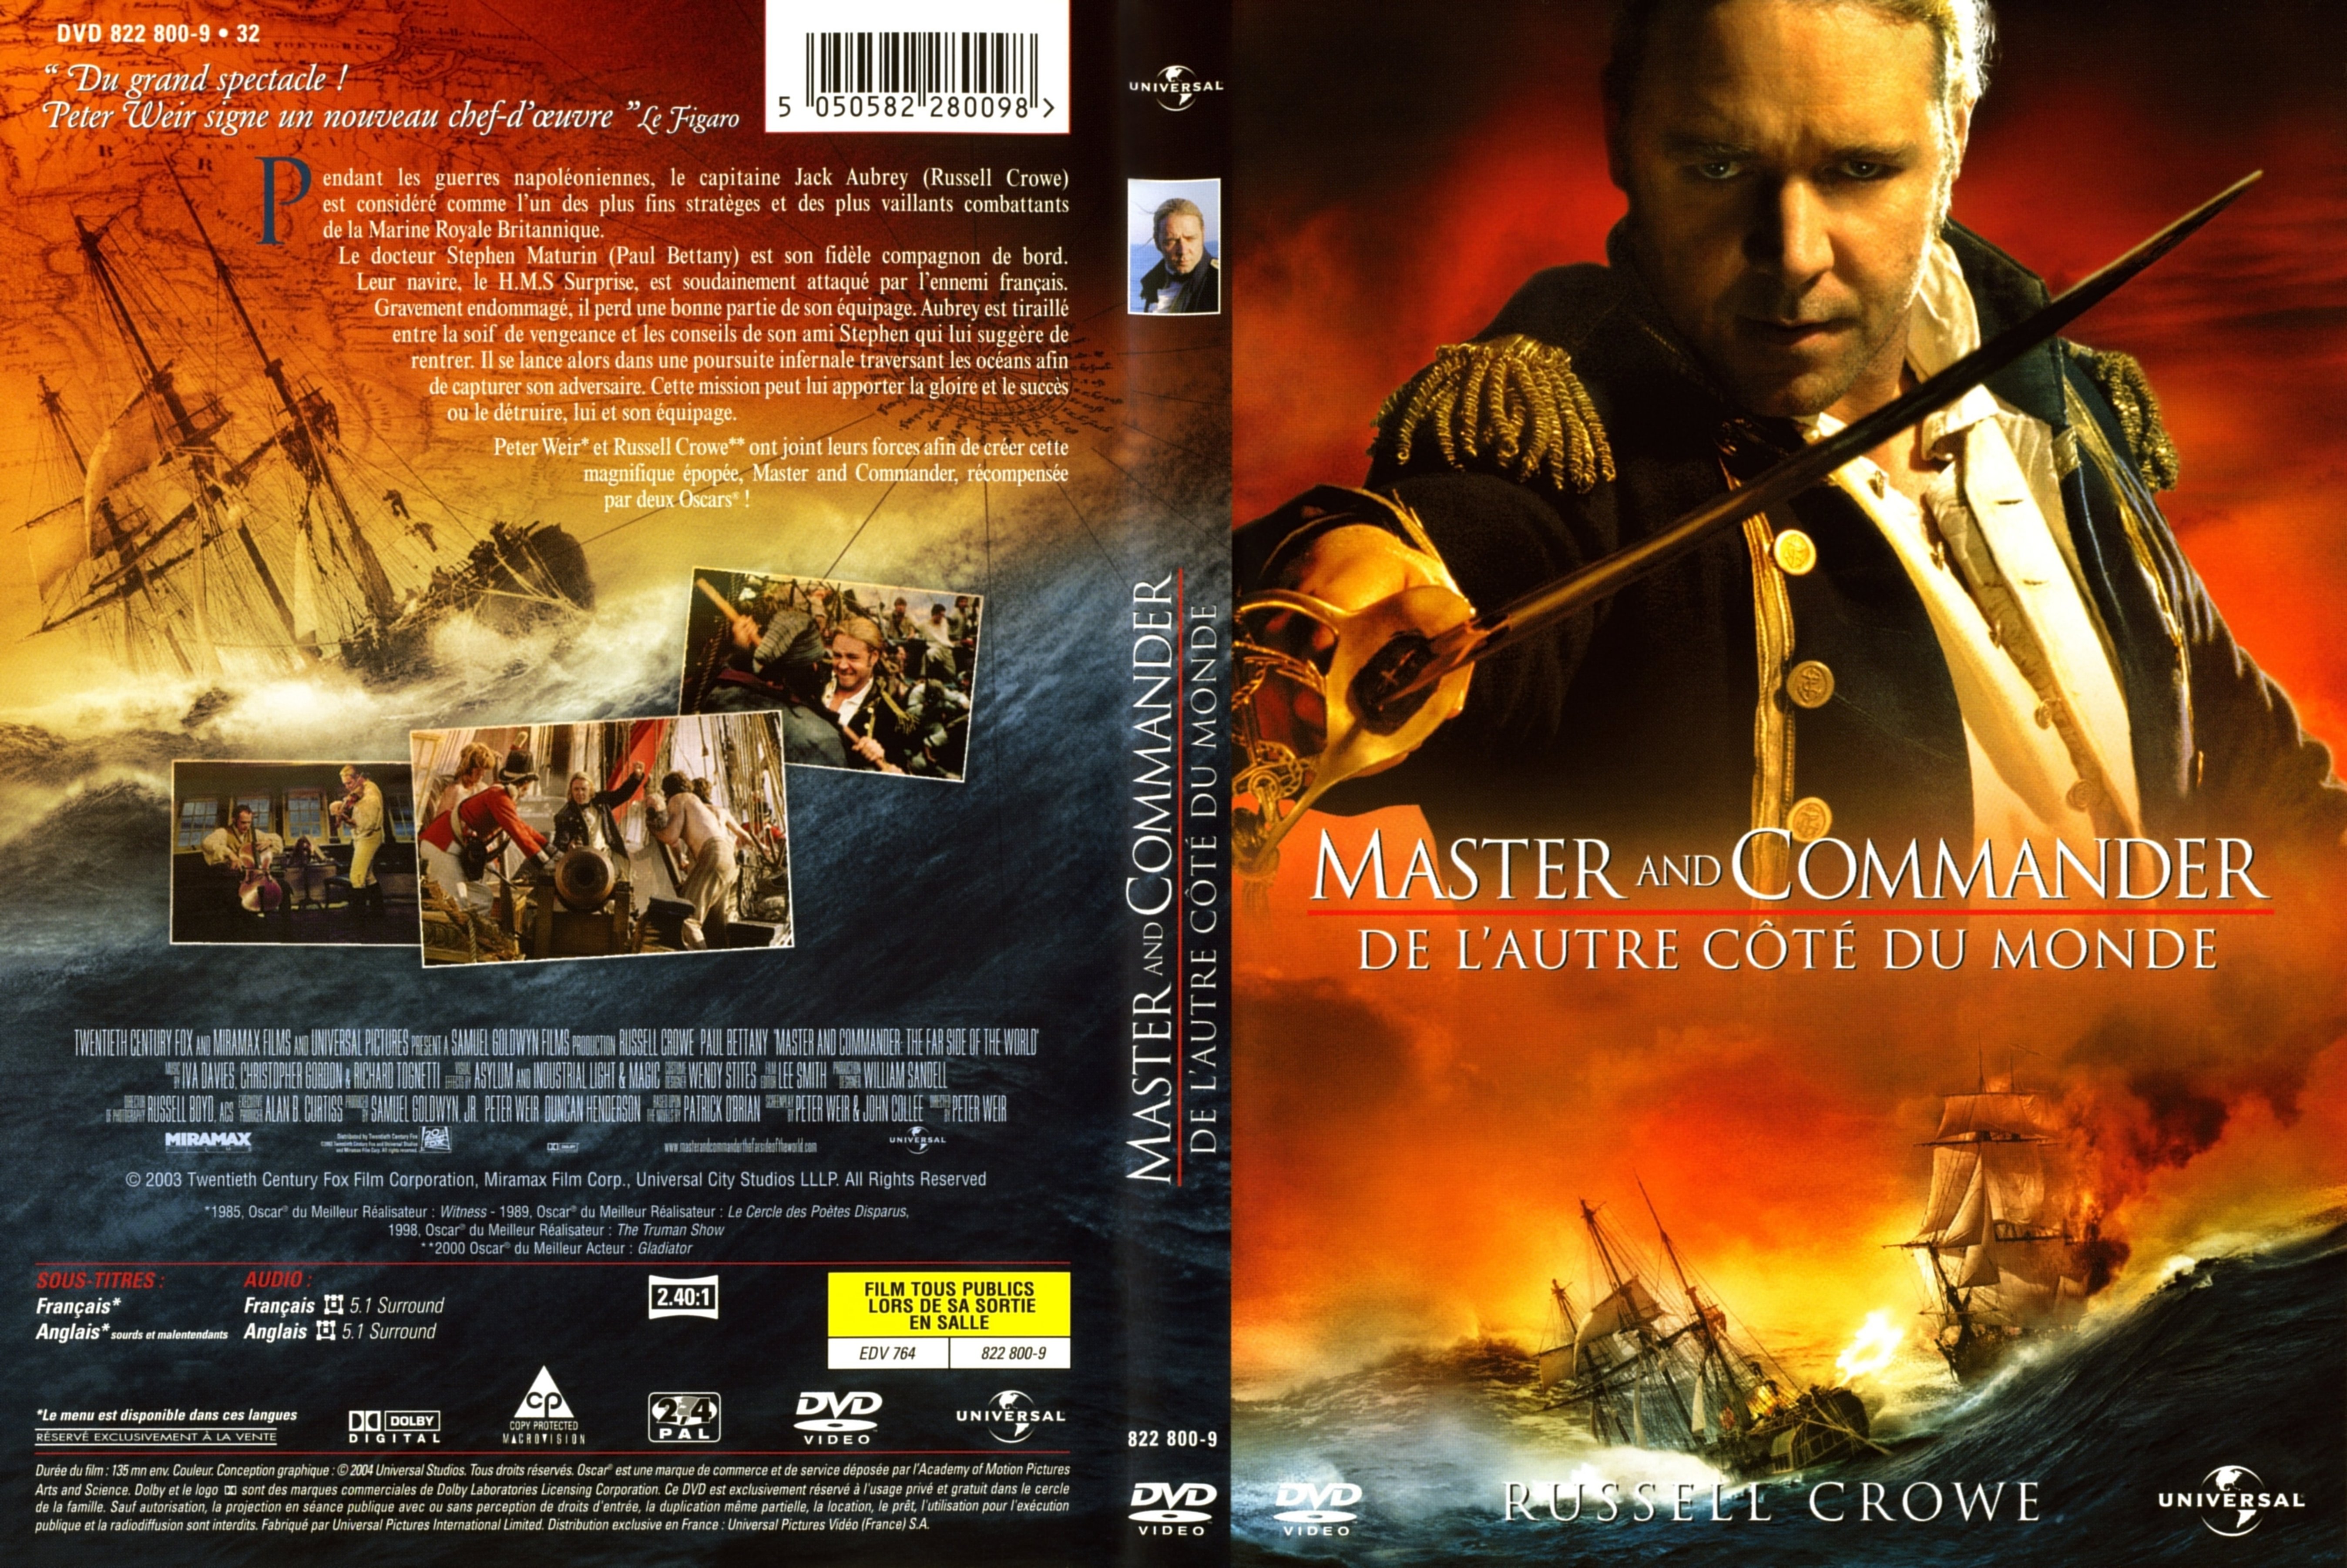 Jaquette DVD Master and commander